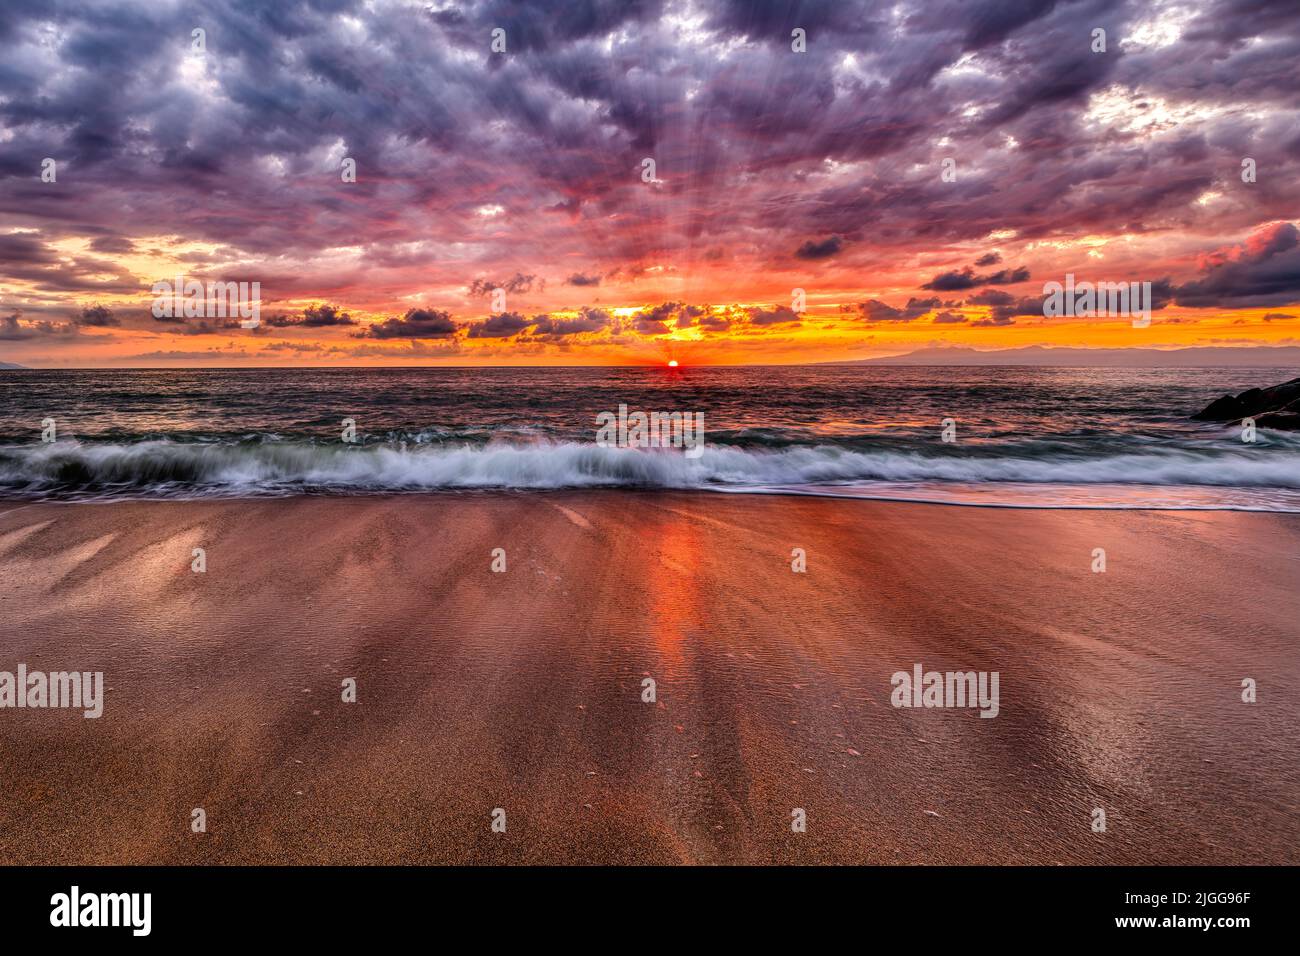 Sun Rays Are Bursting On The Ocean Horizon With A Vivid Colorful Sunset Sky Stock Photo